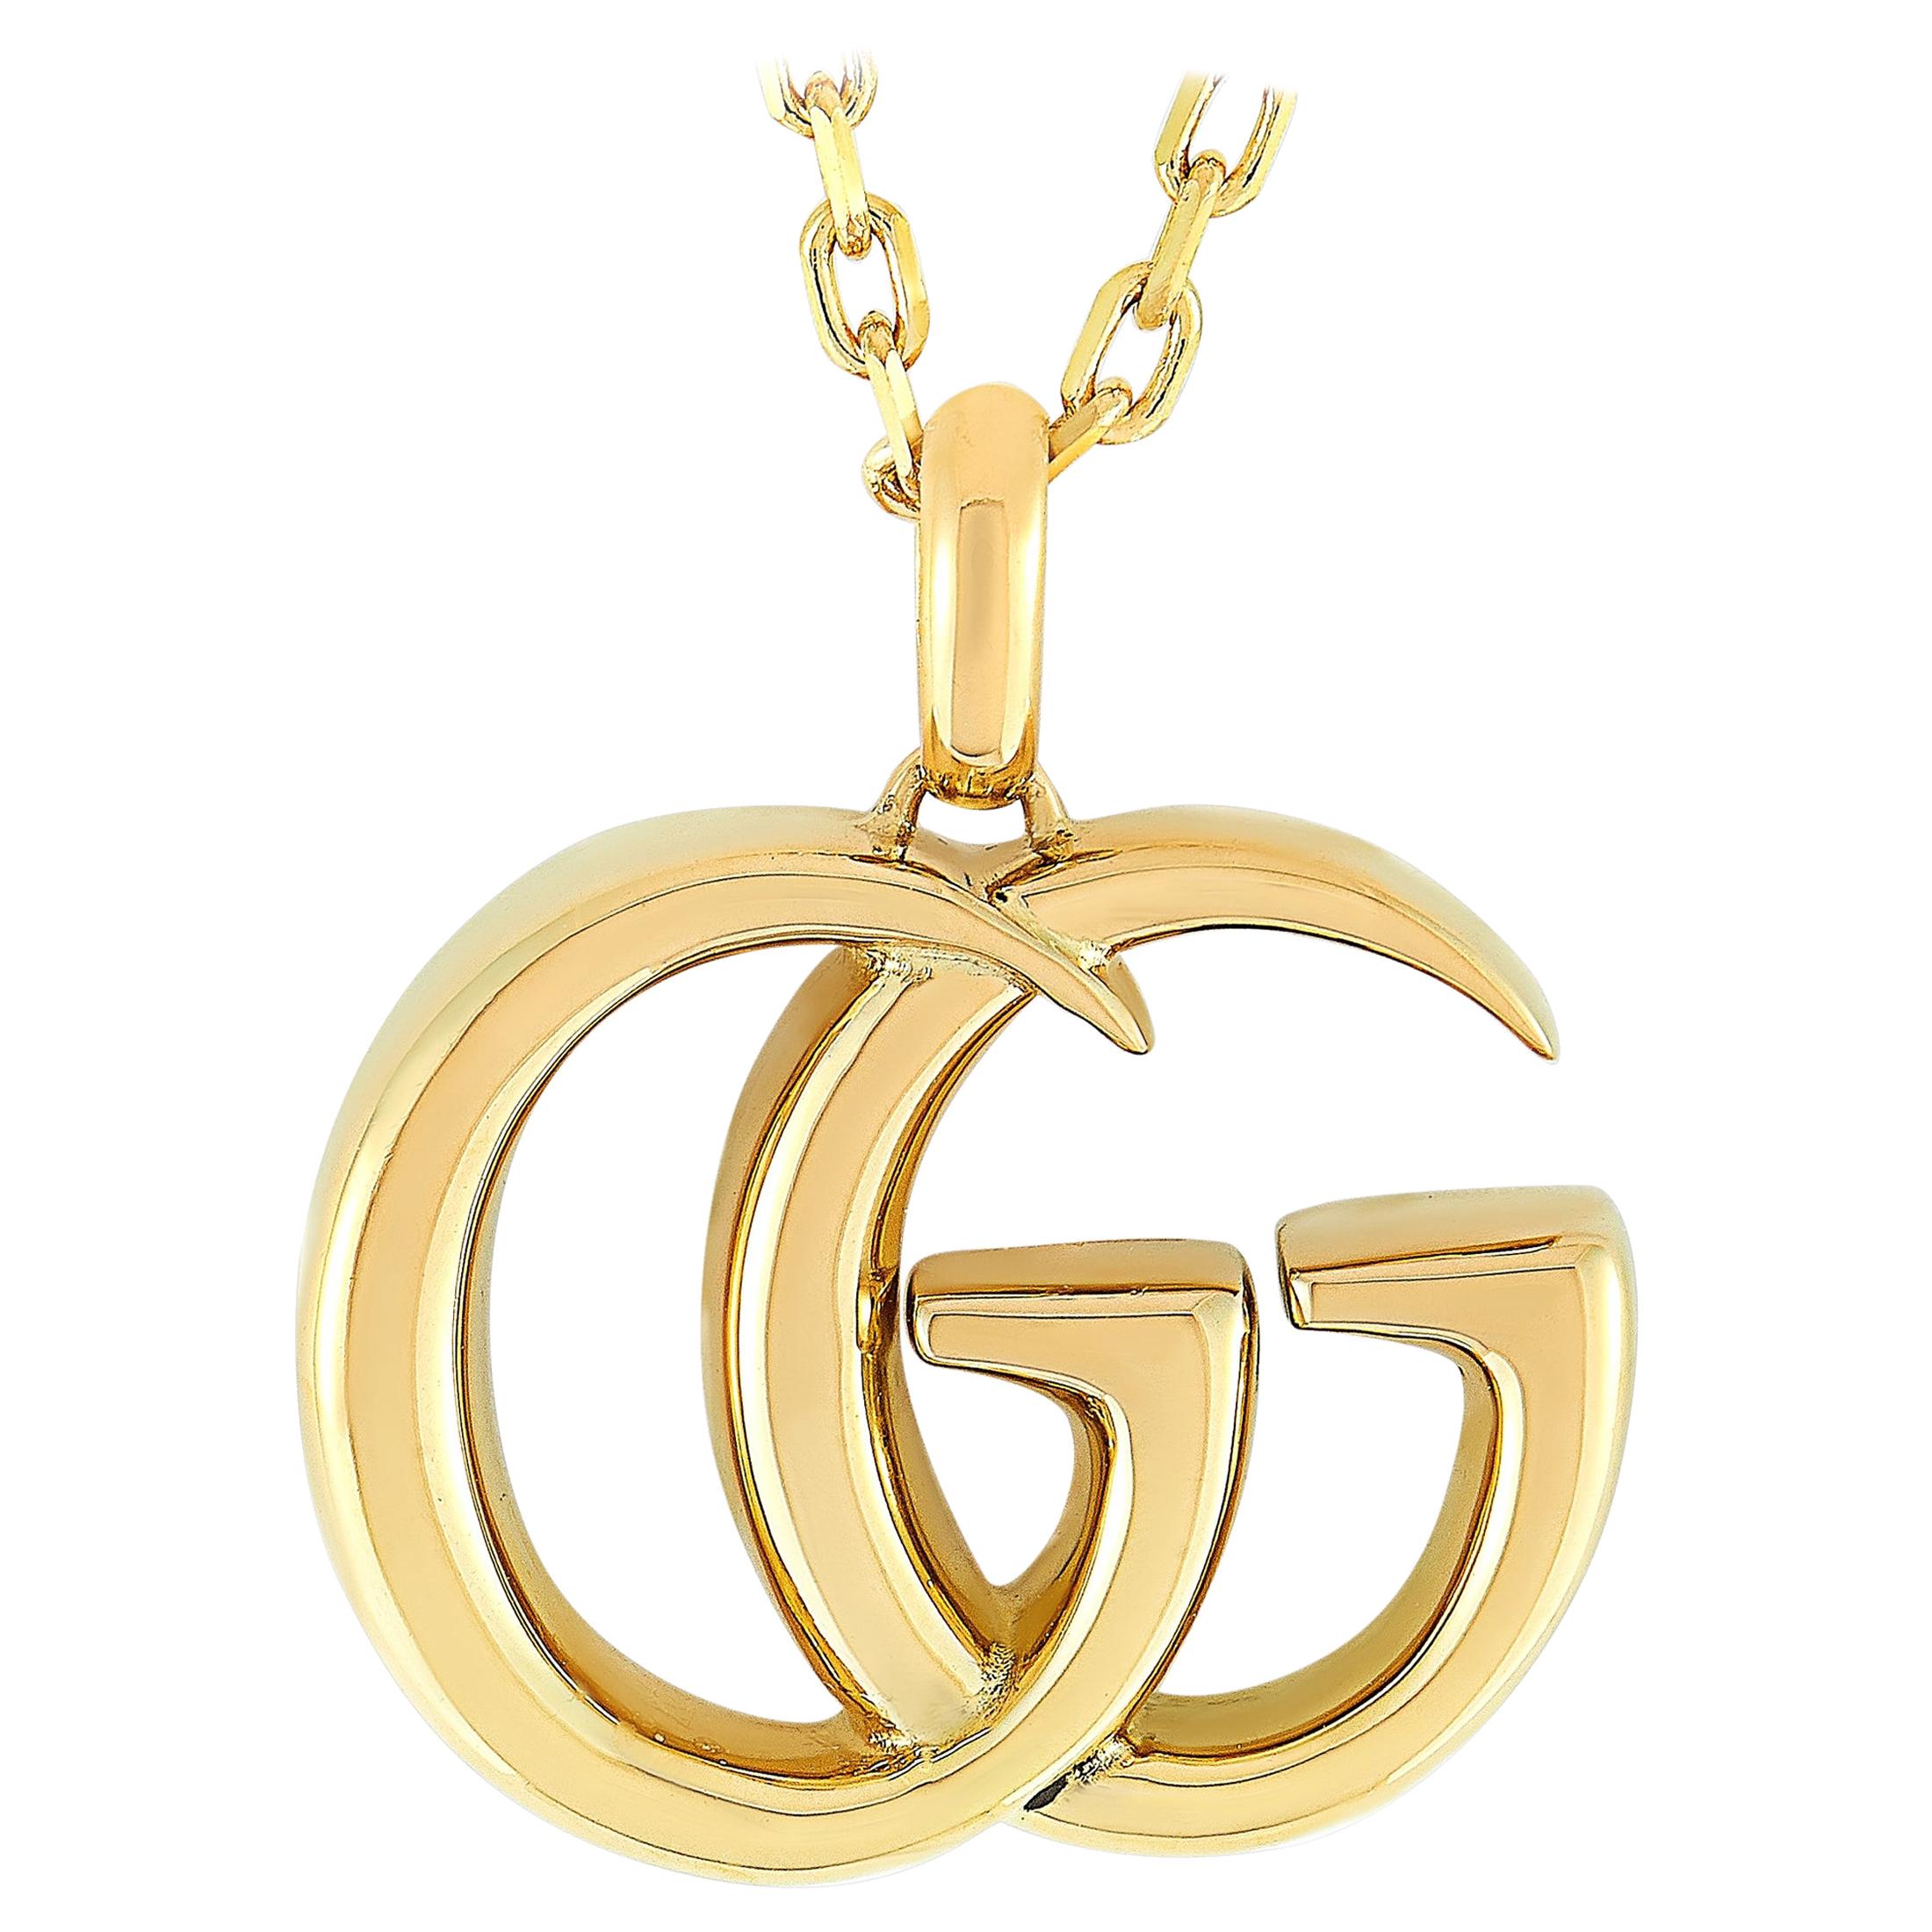 gg gold necklace